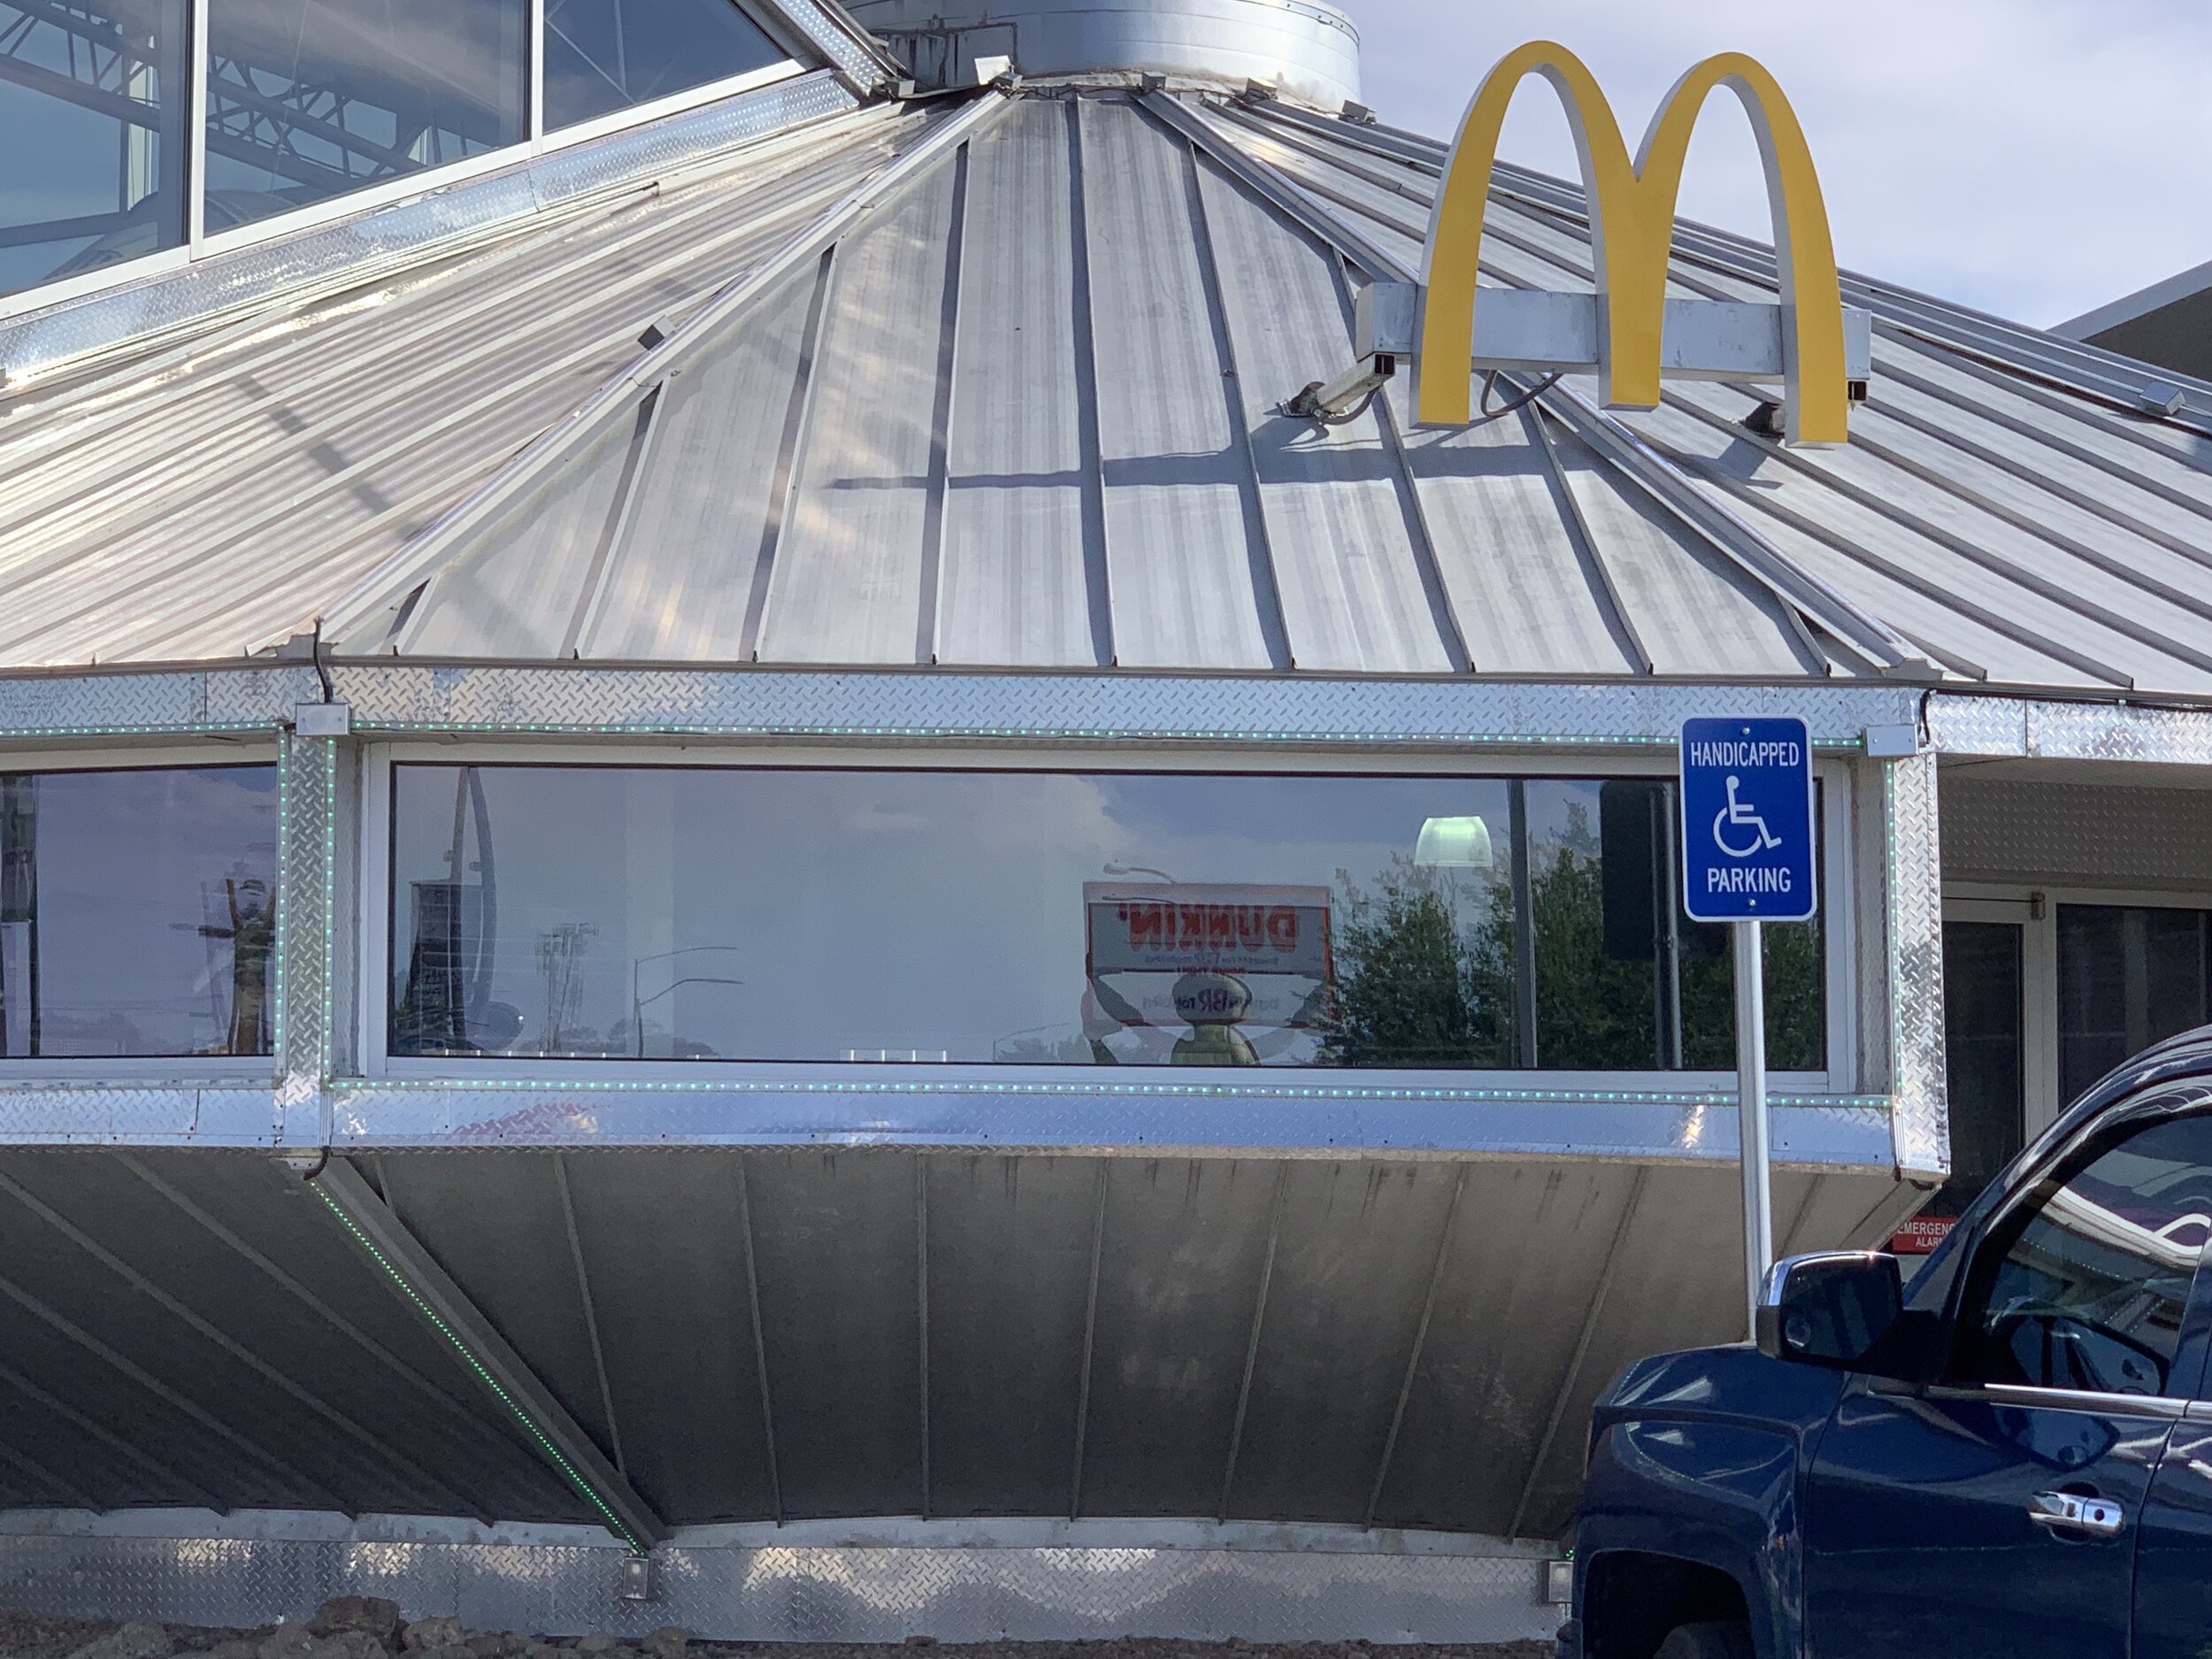  Even McDonalds gets in on the alien theme in Roswell with their spaceship-shaped dining area. 